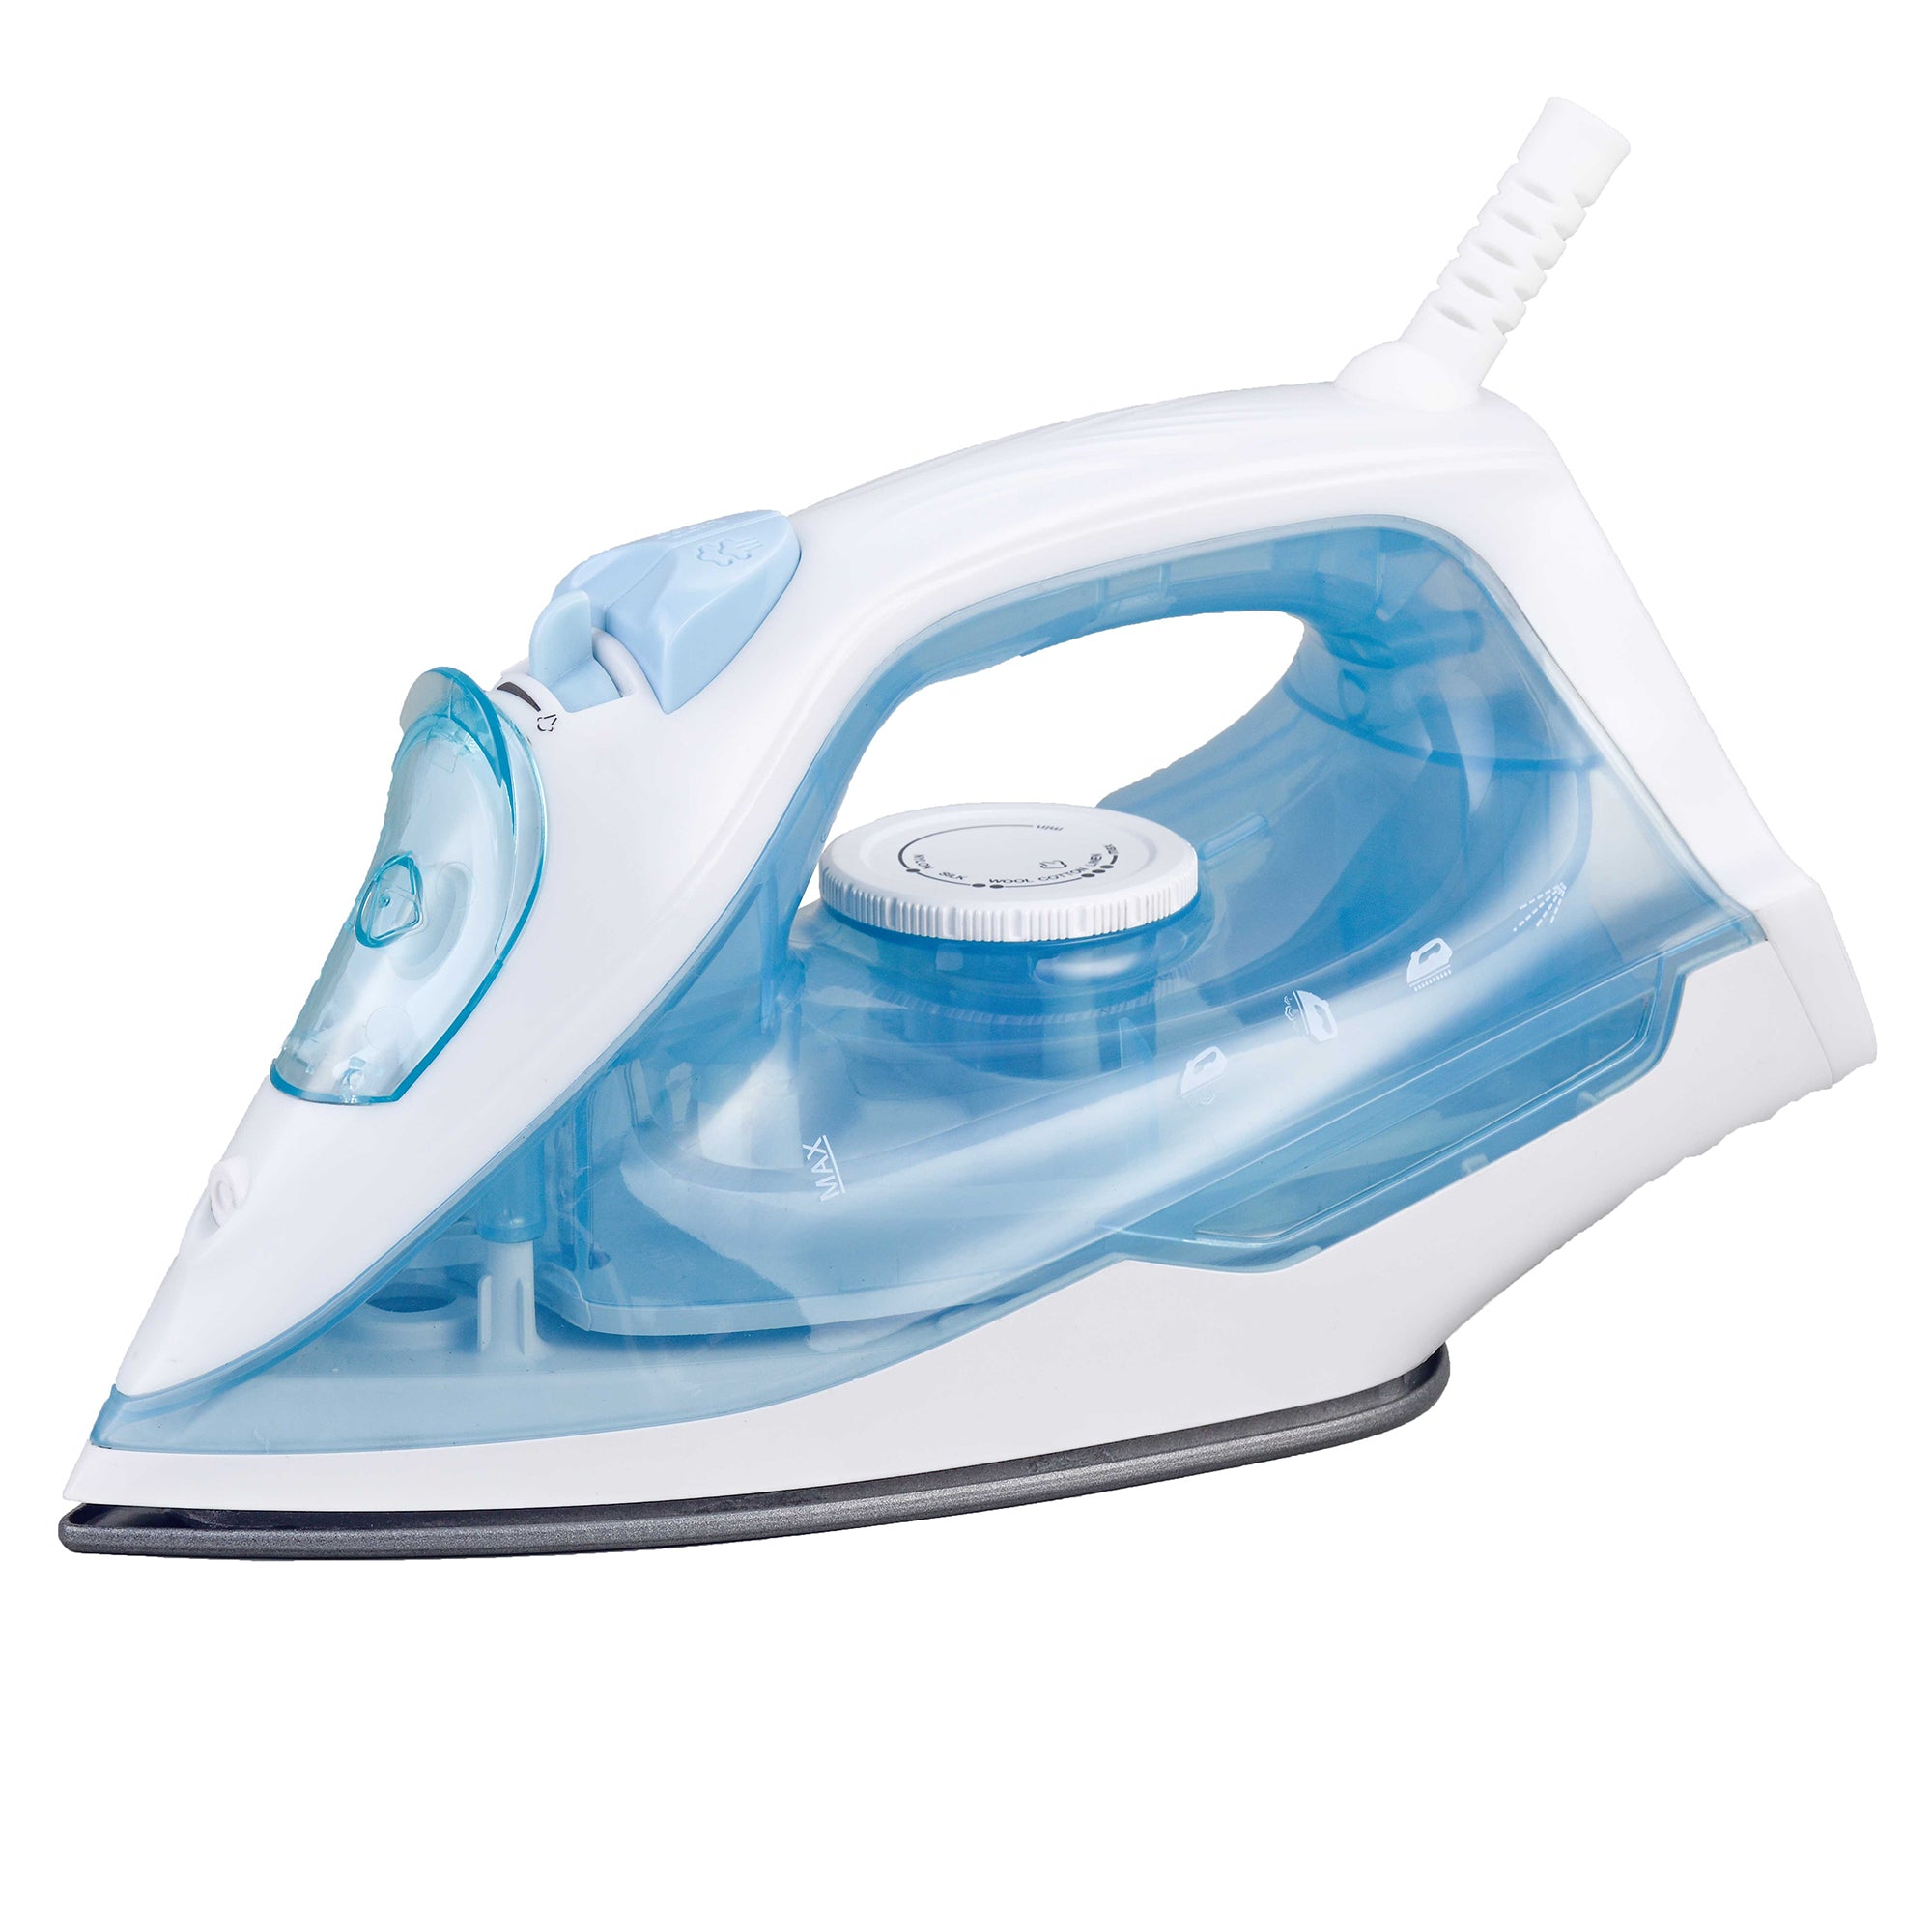 Coming Soon - Brentwood MPI-51W 1200W Lightweight Non-Stick Steam Iron with Extra Long 8FT Cord, White